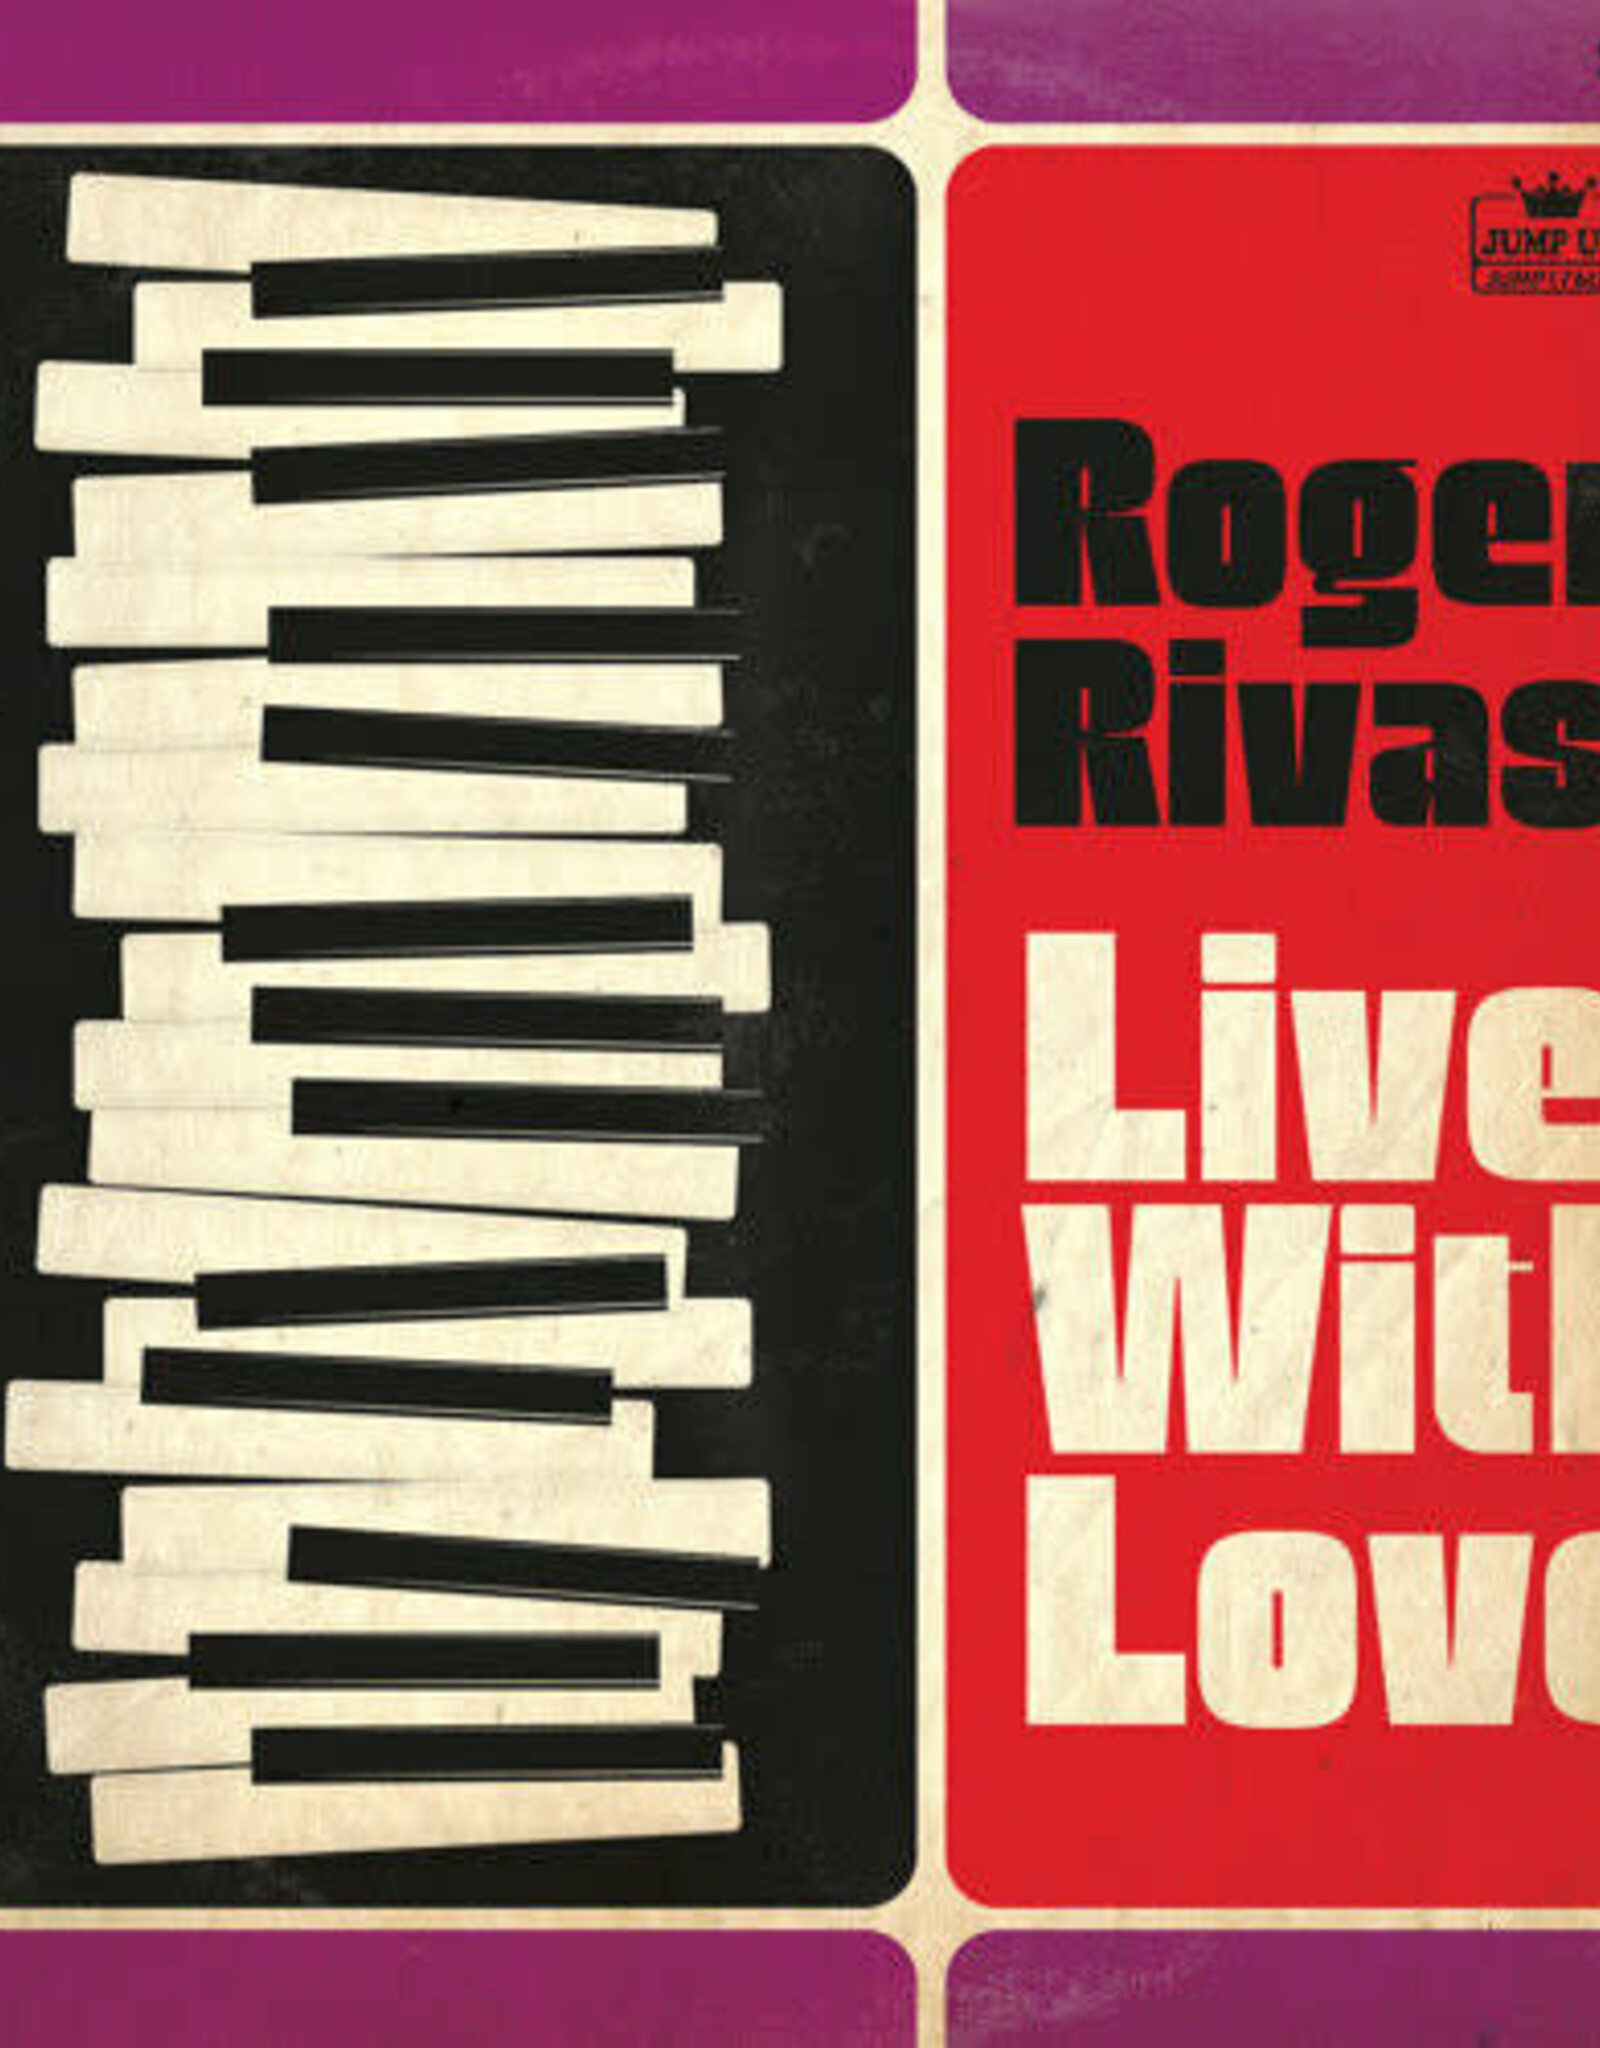 Roger Rivas – Live With Love